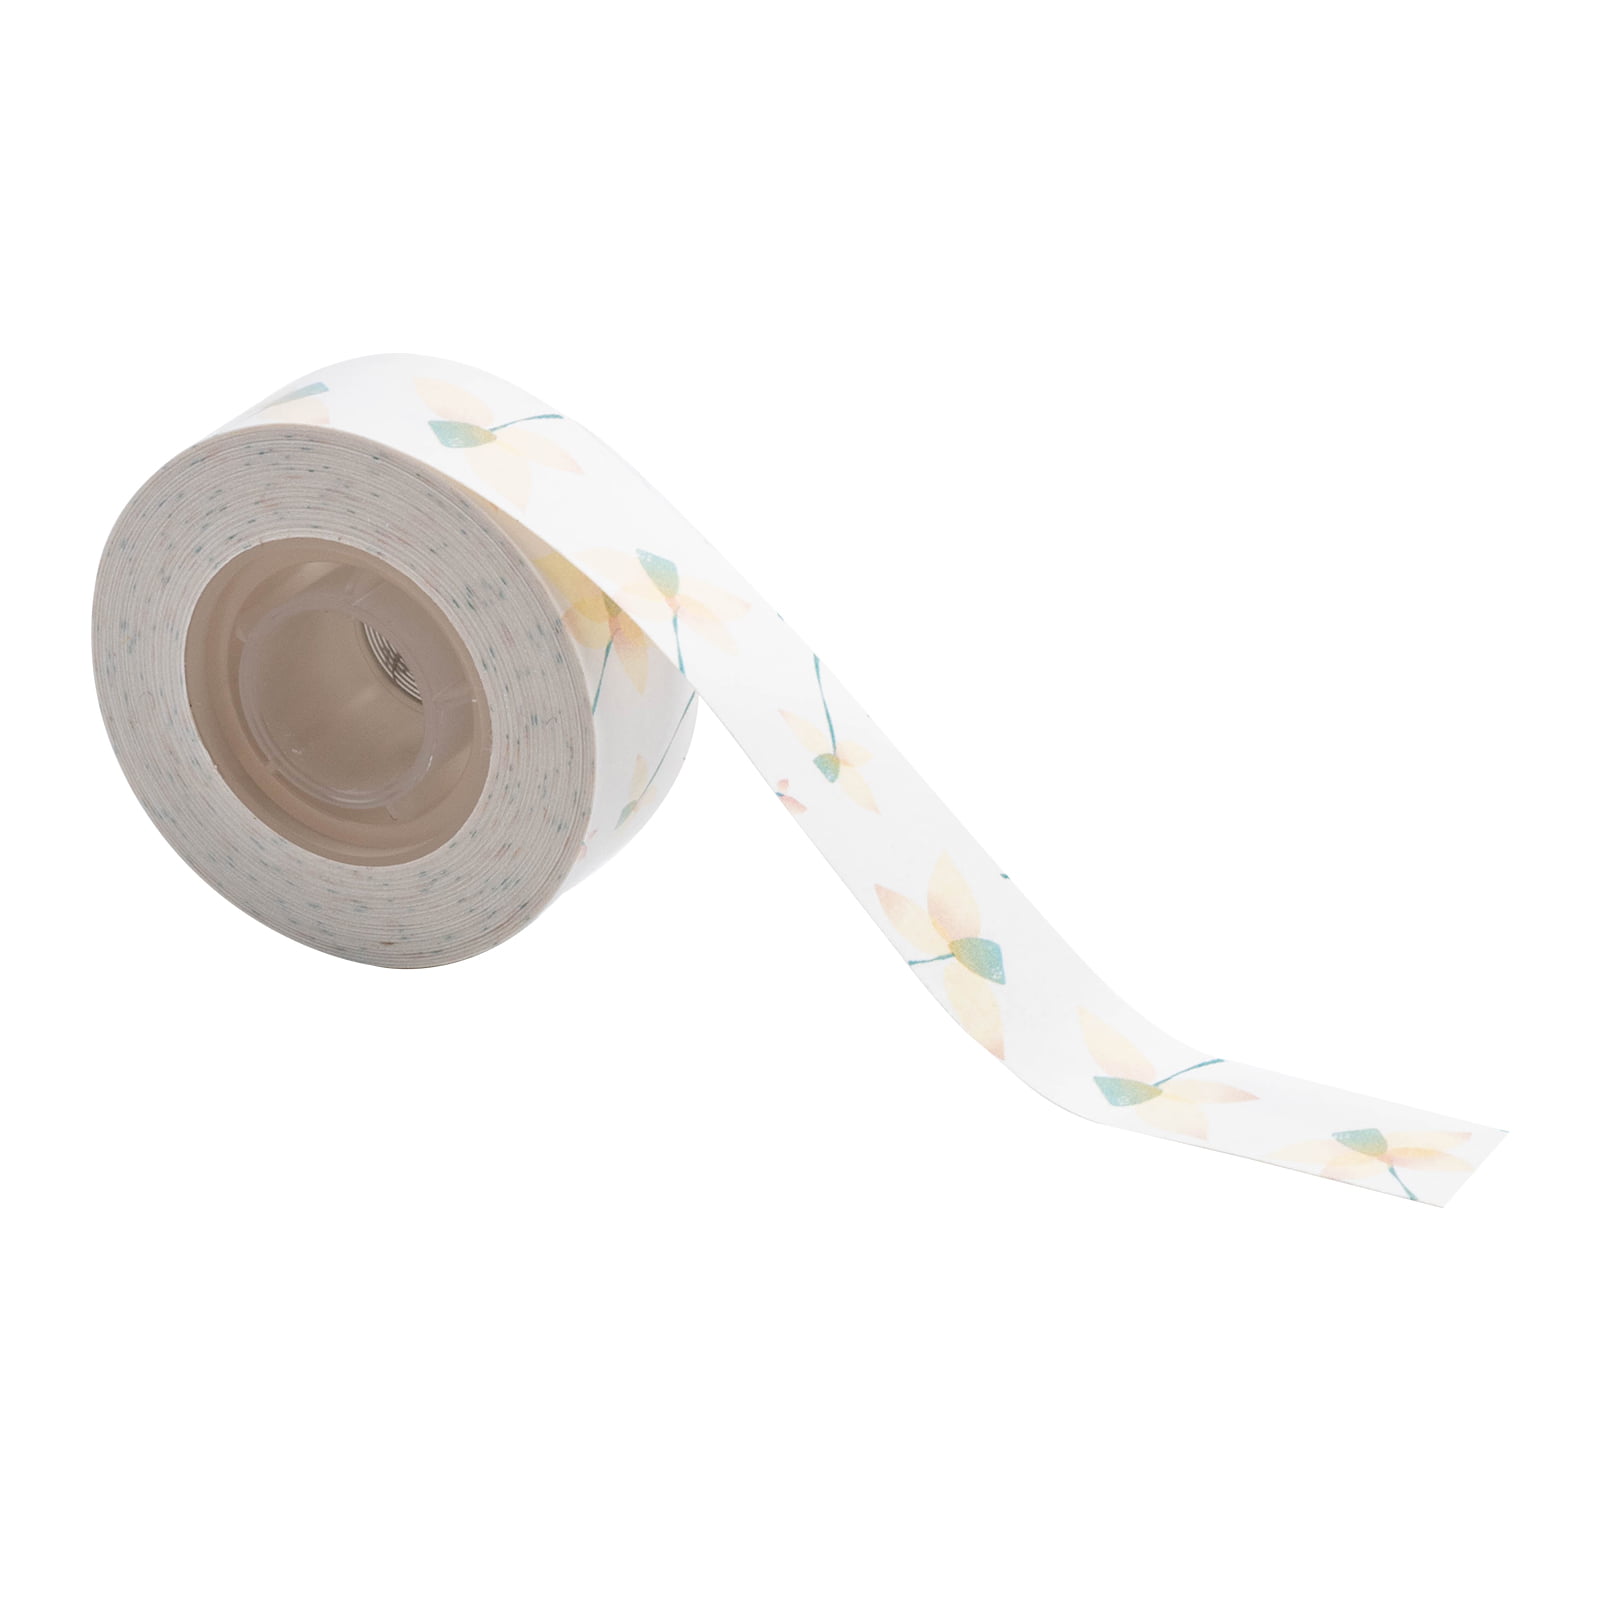 Details about   High Quality Clear Uniform Writing Label Tape Good Waterproof Print Label Tape 